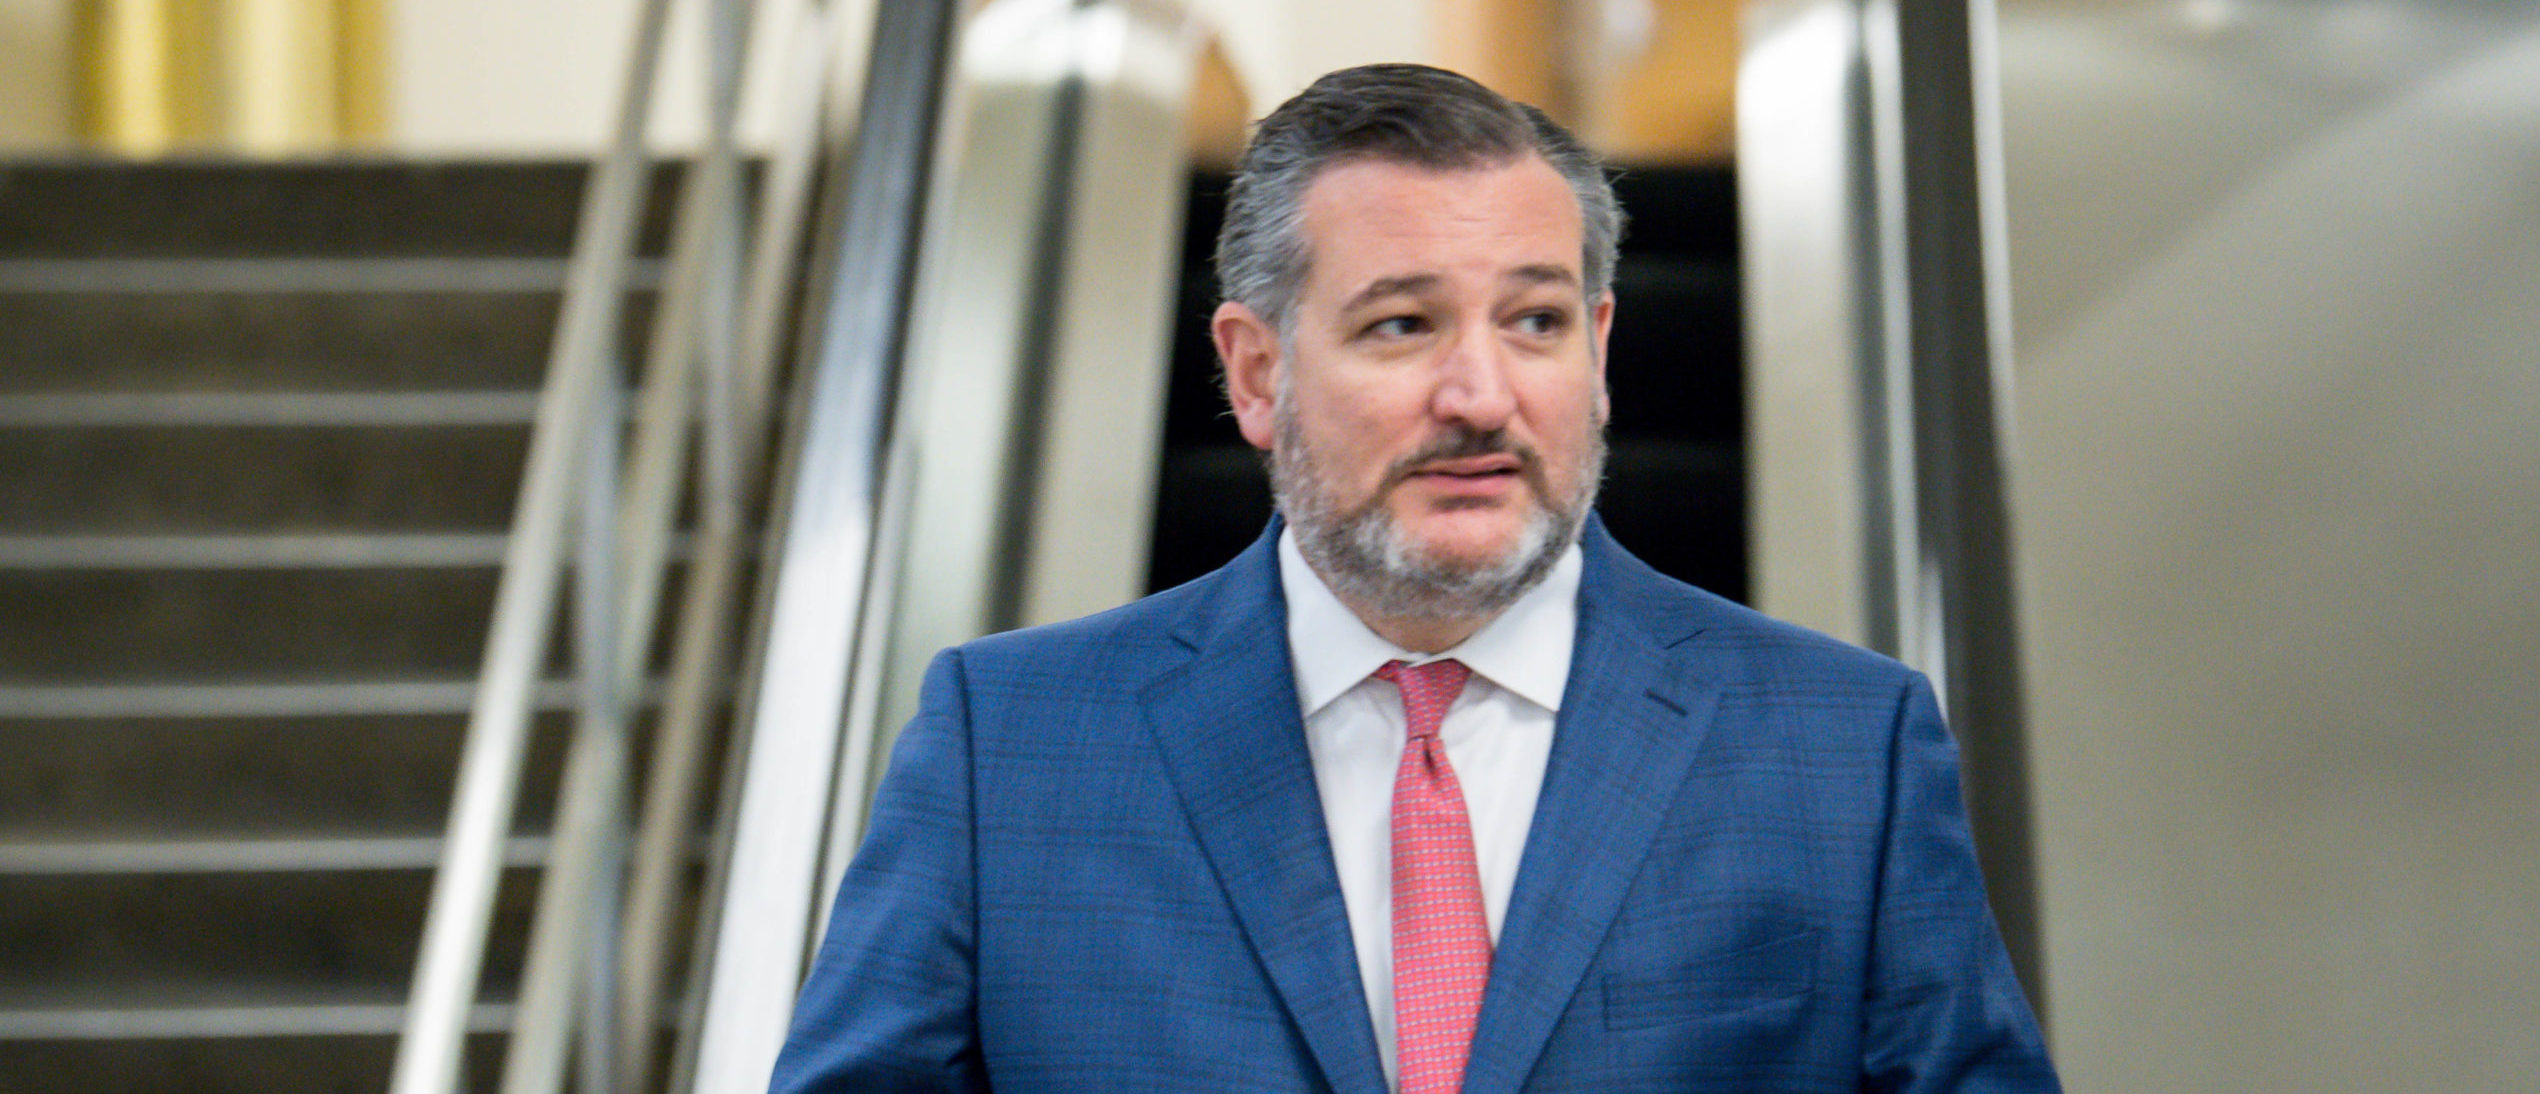 ‘Republican Leadership Blinked’: Ted Cruz Says McConnell Caved On Debt Ceiling Out Of Fear Democrats Would Nuke Filibuster thumbnail